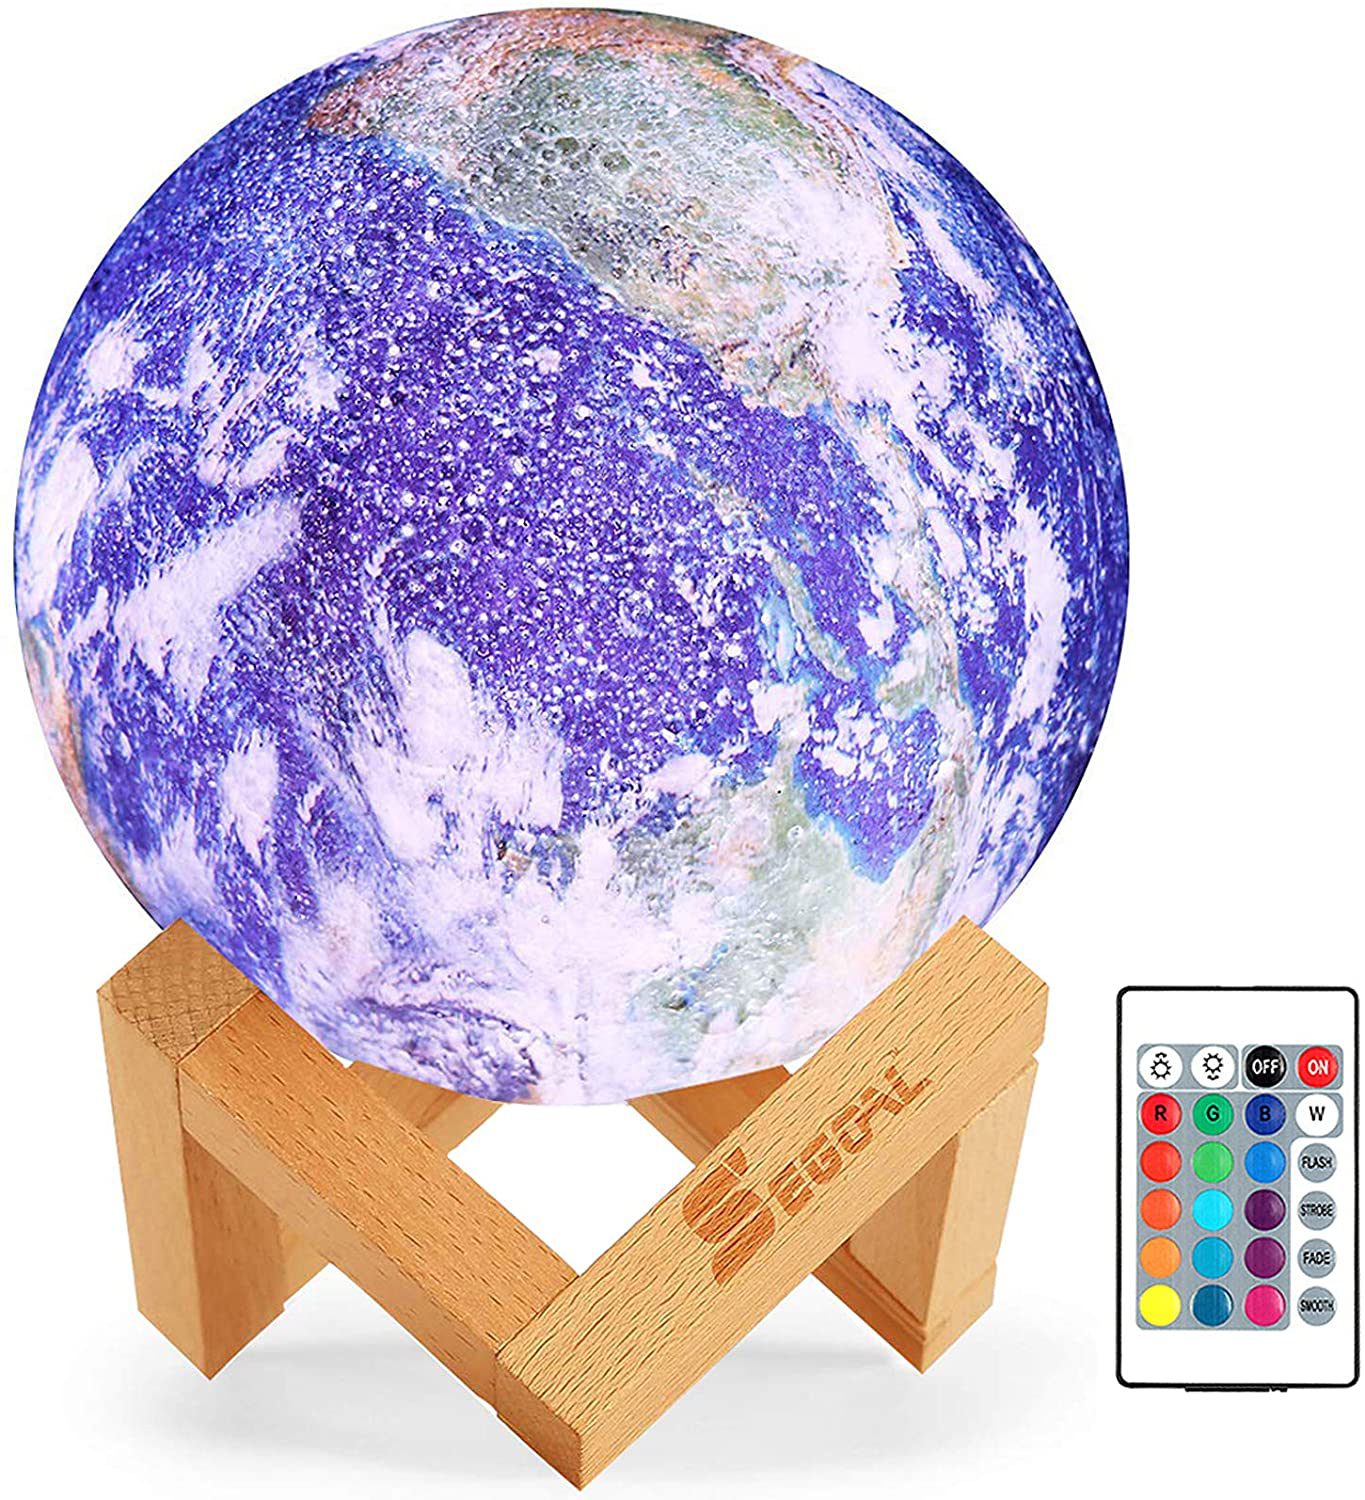 Kids Rechargeable 16 Color 3D LED Moon Lamp With Wood Stand 